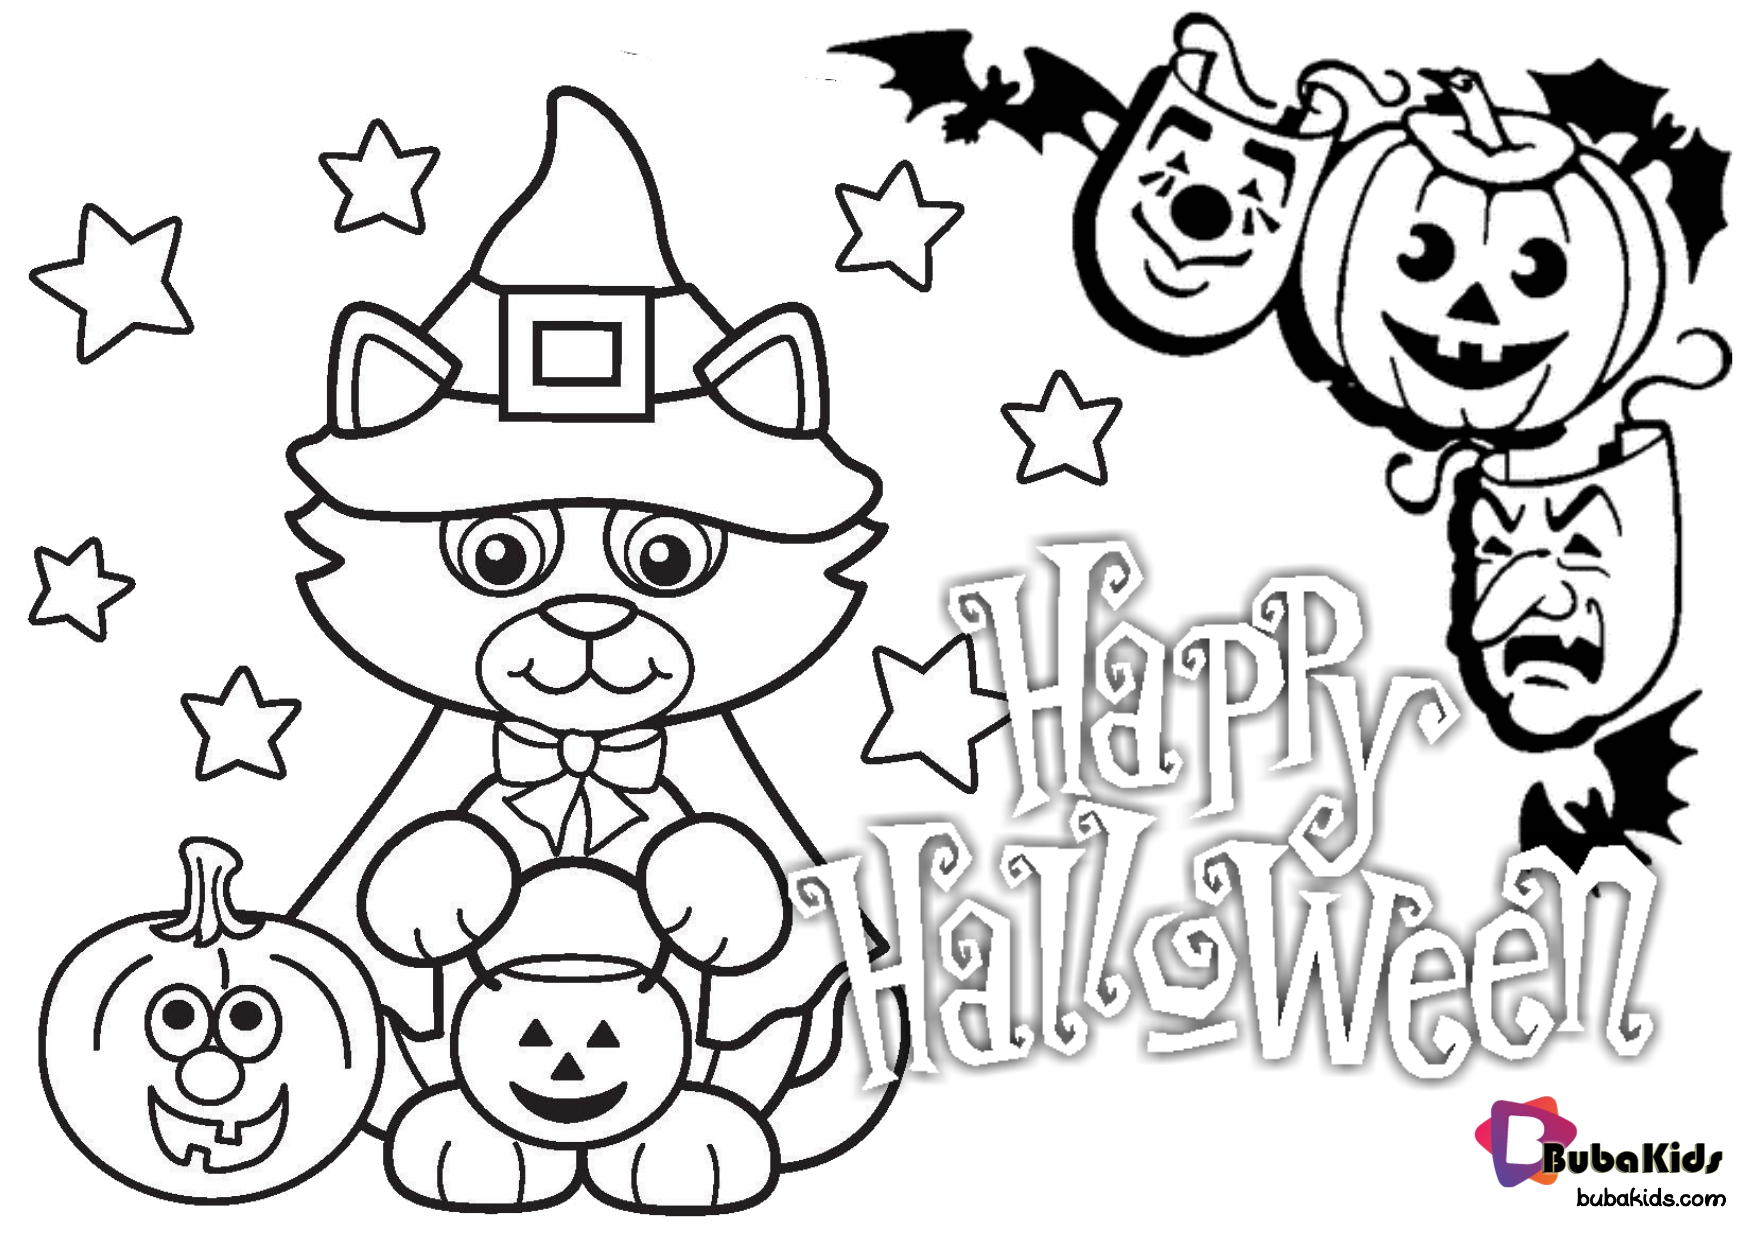 Happy halloween trick or treat free printable coloring pages on bubakids.